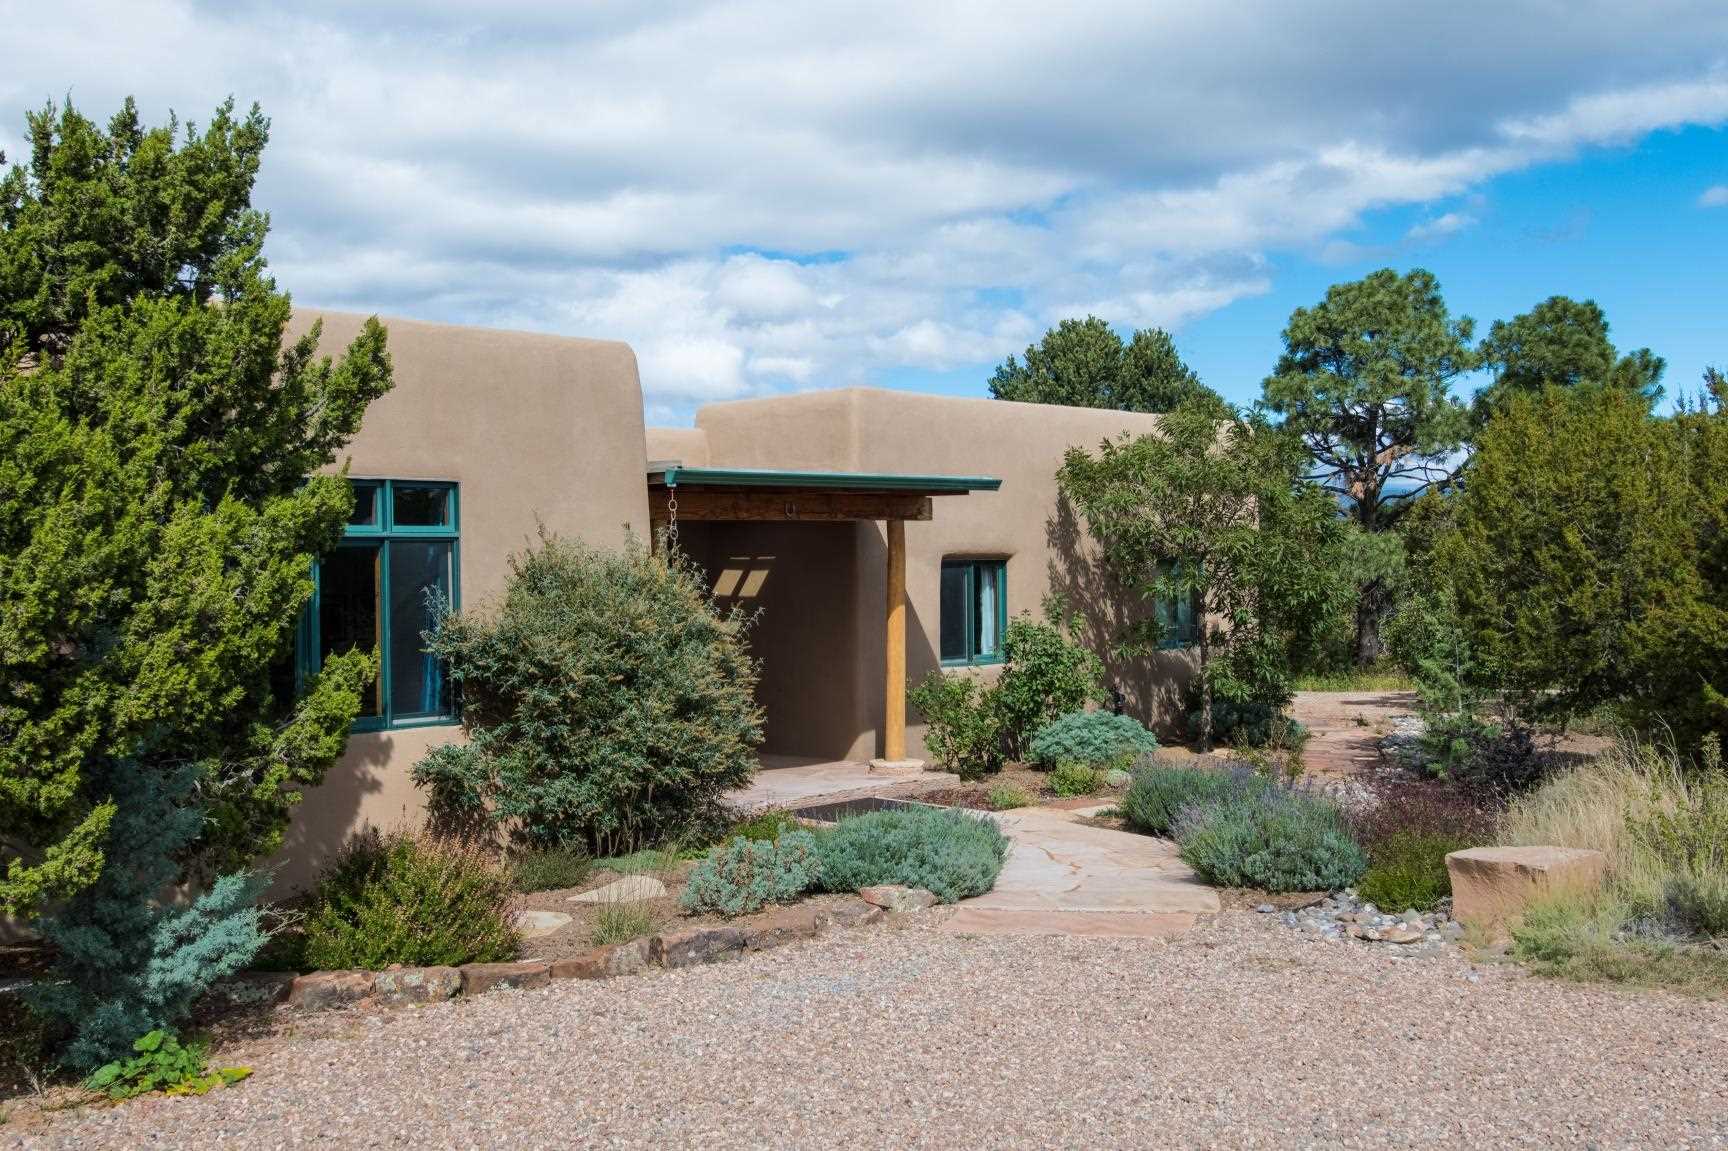 83 Old Agua Fria, Santa Fe, New Mexico 87508, 4 Bedrooms Bedrooms, ,3 BathroomsBathrooms,Residential,For Sale,83 Old Agua Fria,202103680